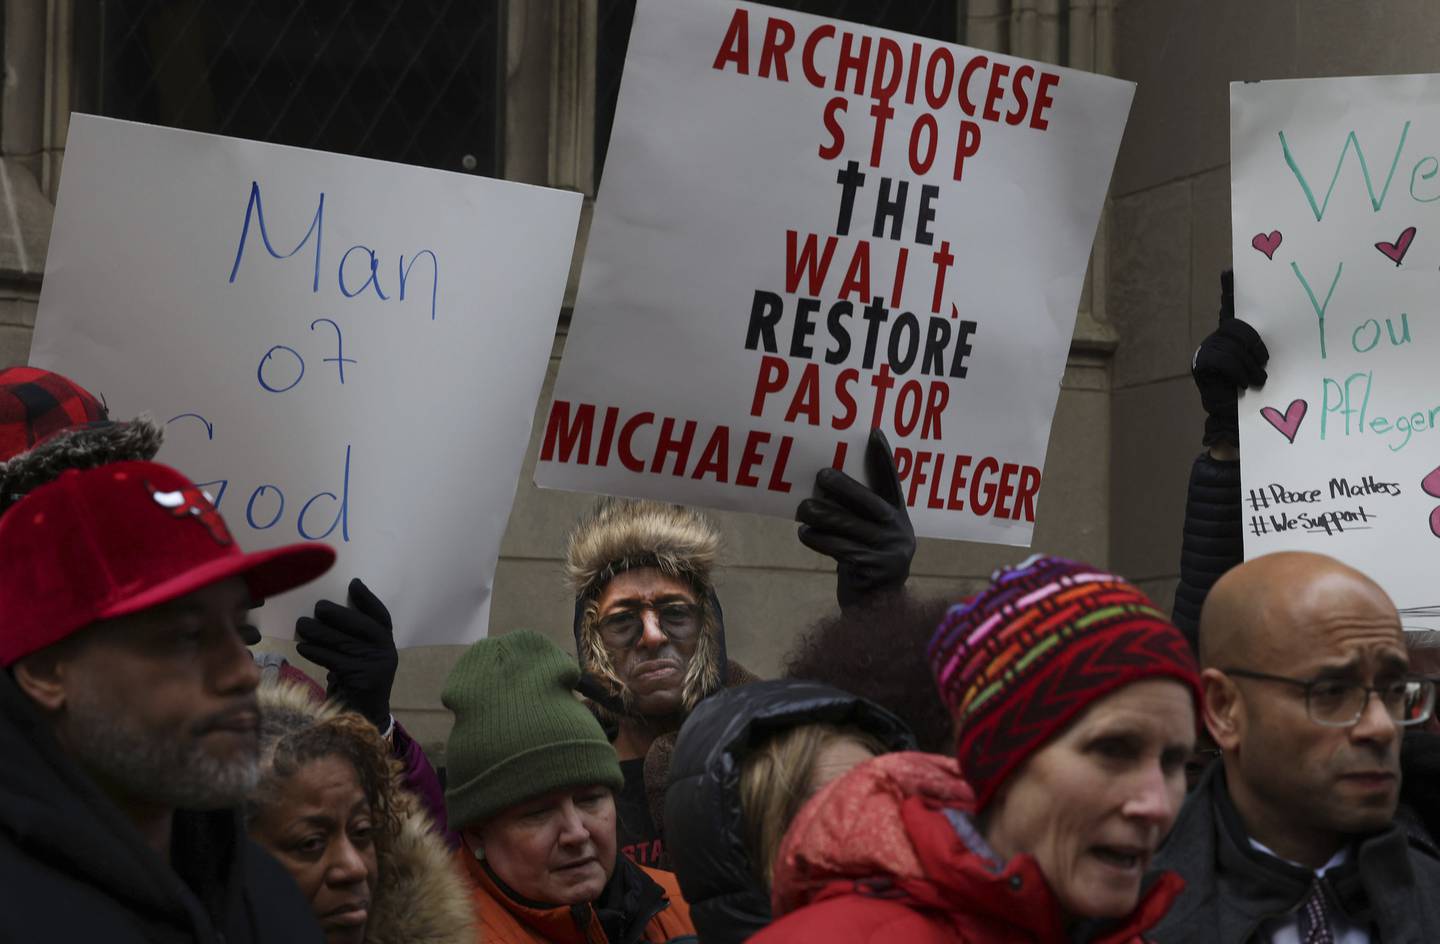 Community leaders and members of the St. Sabina parish rally in support of the Rev. Michael Pfleger outside the Archdiocese of Chicago on Nov. 17, 2022.